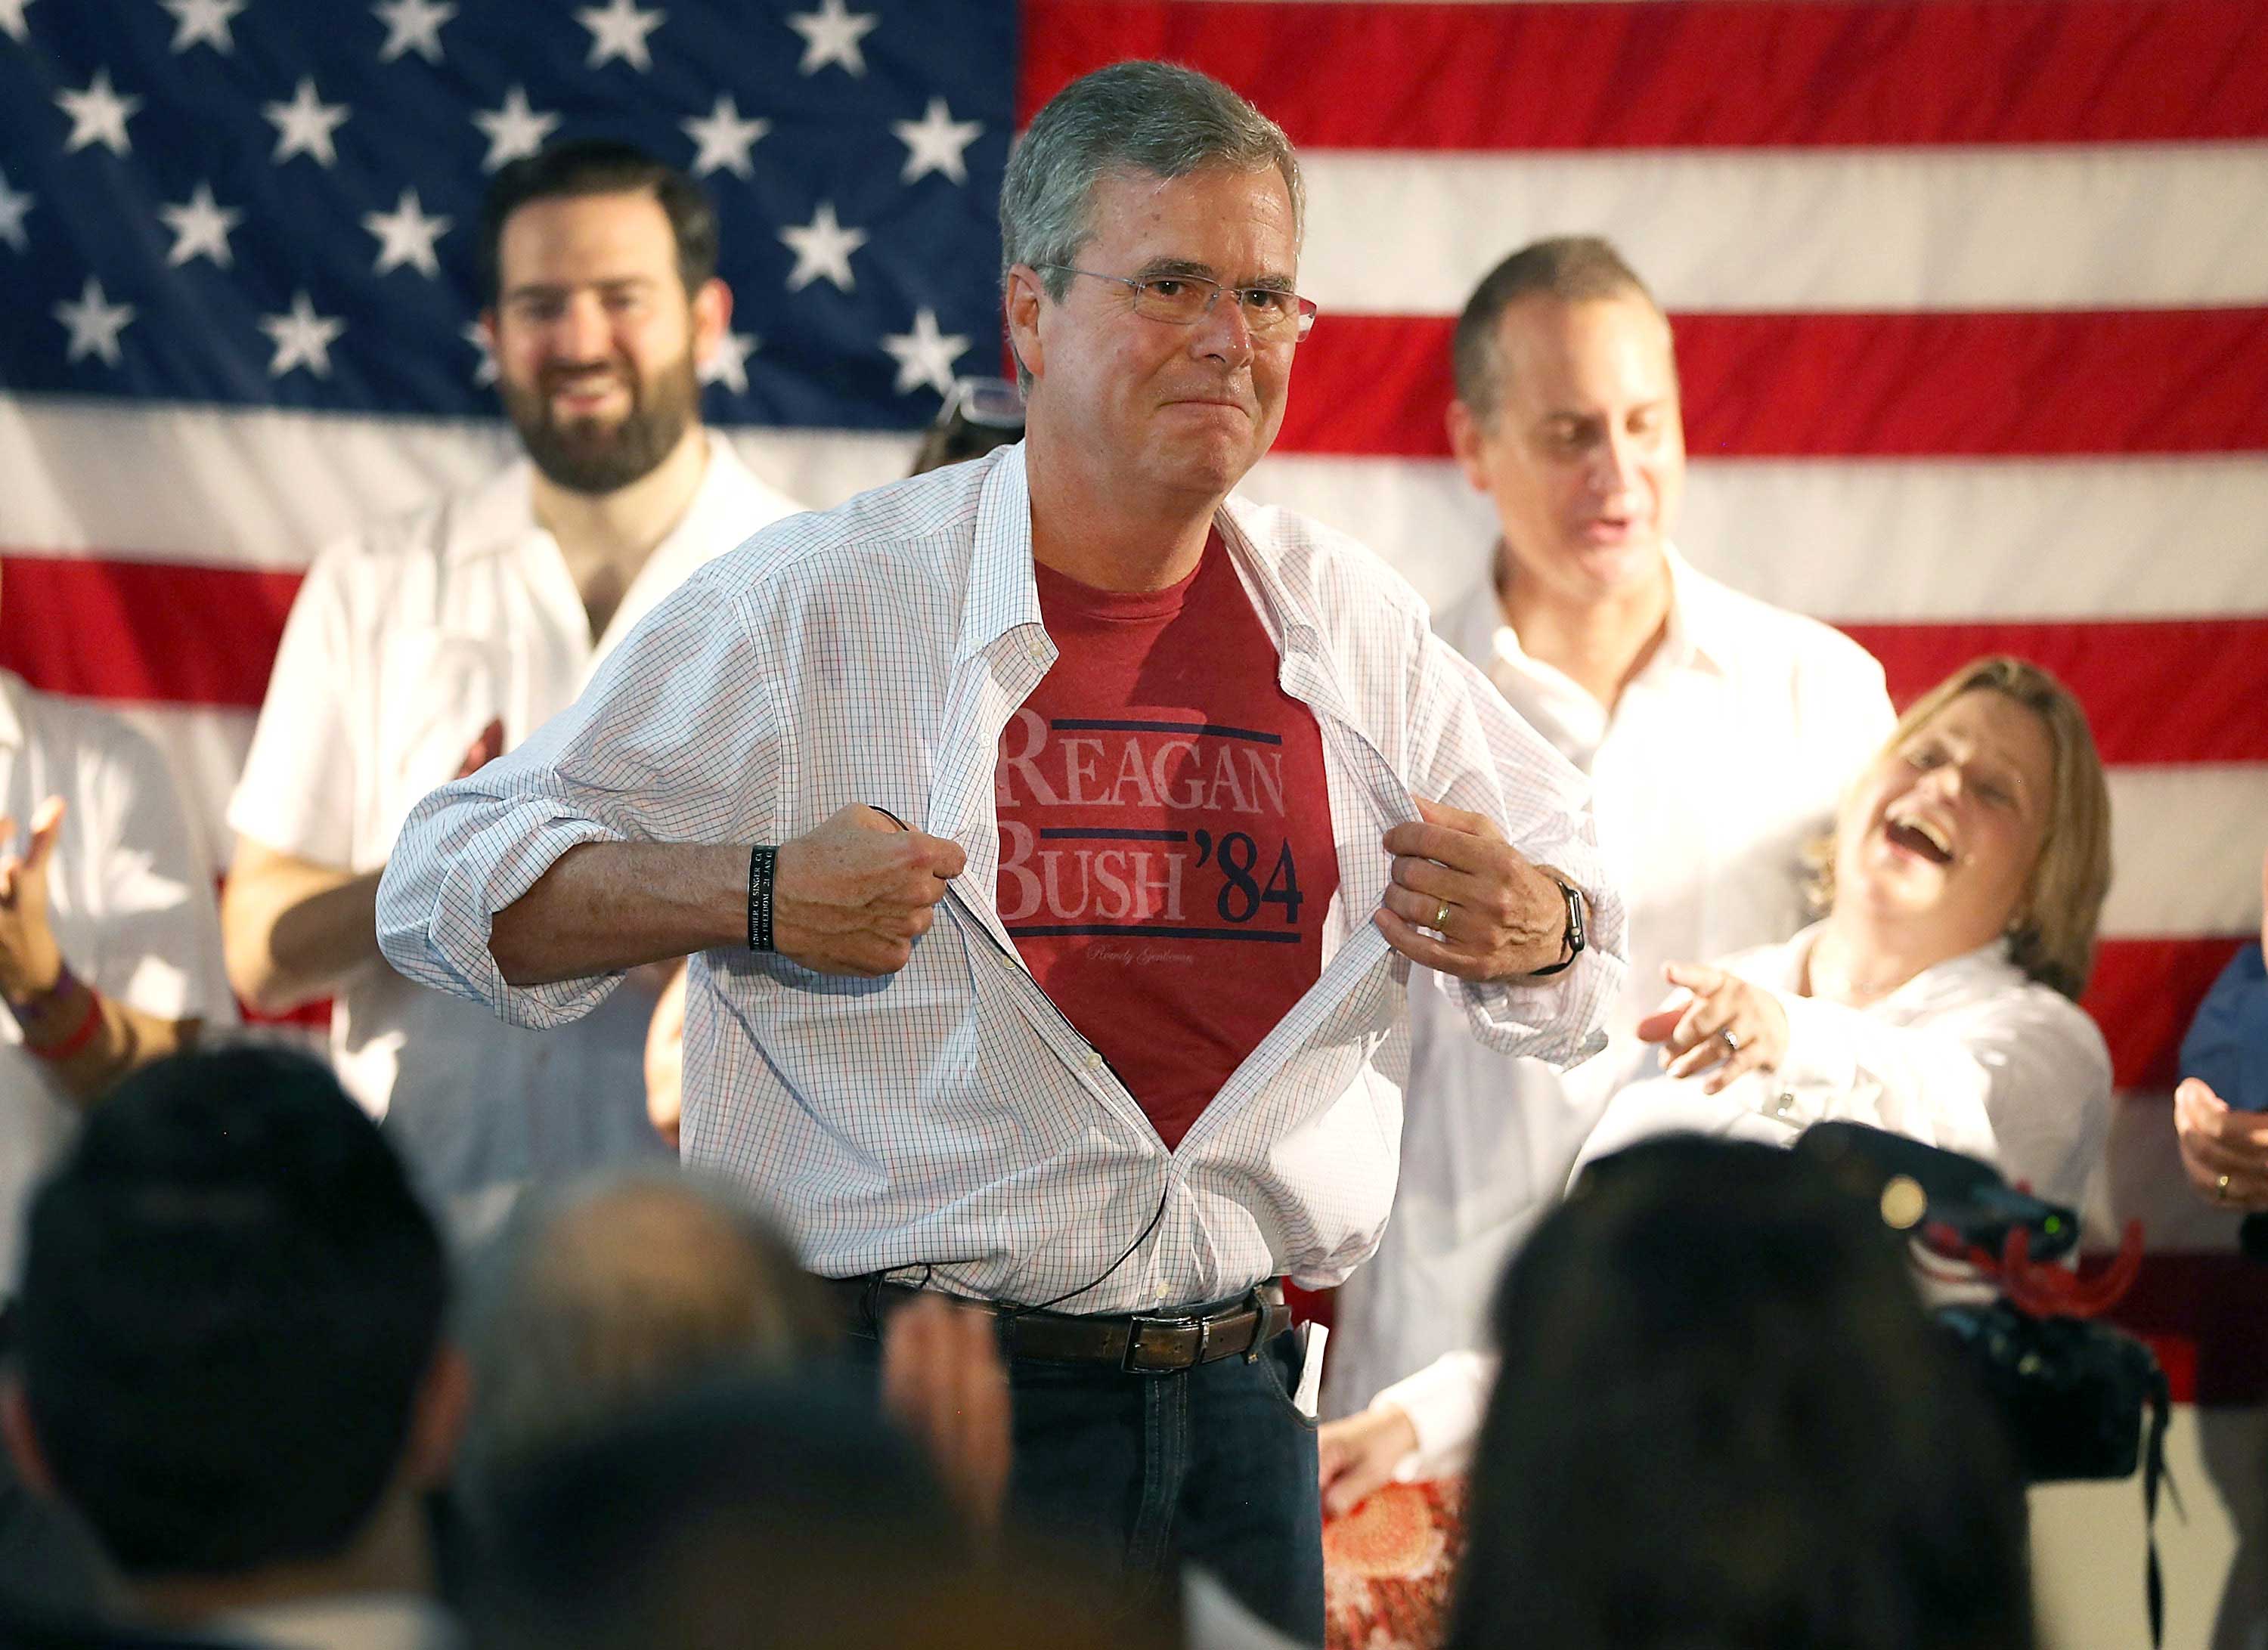 Jeb Bush shows off a Reagan/Bush '84 T-shirt as he speaks during a Miami field office opening on Sept. 12, 2015.
